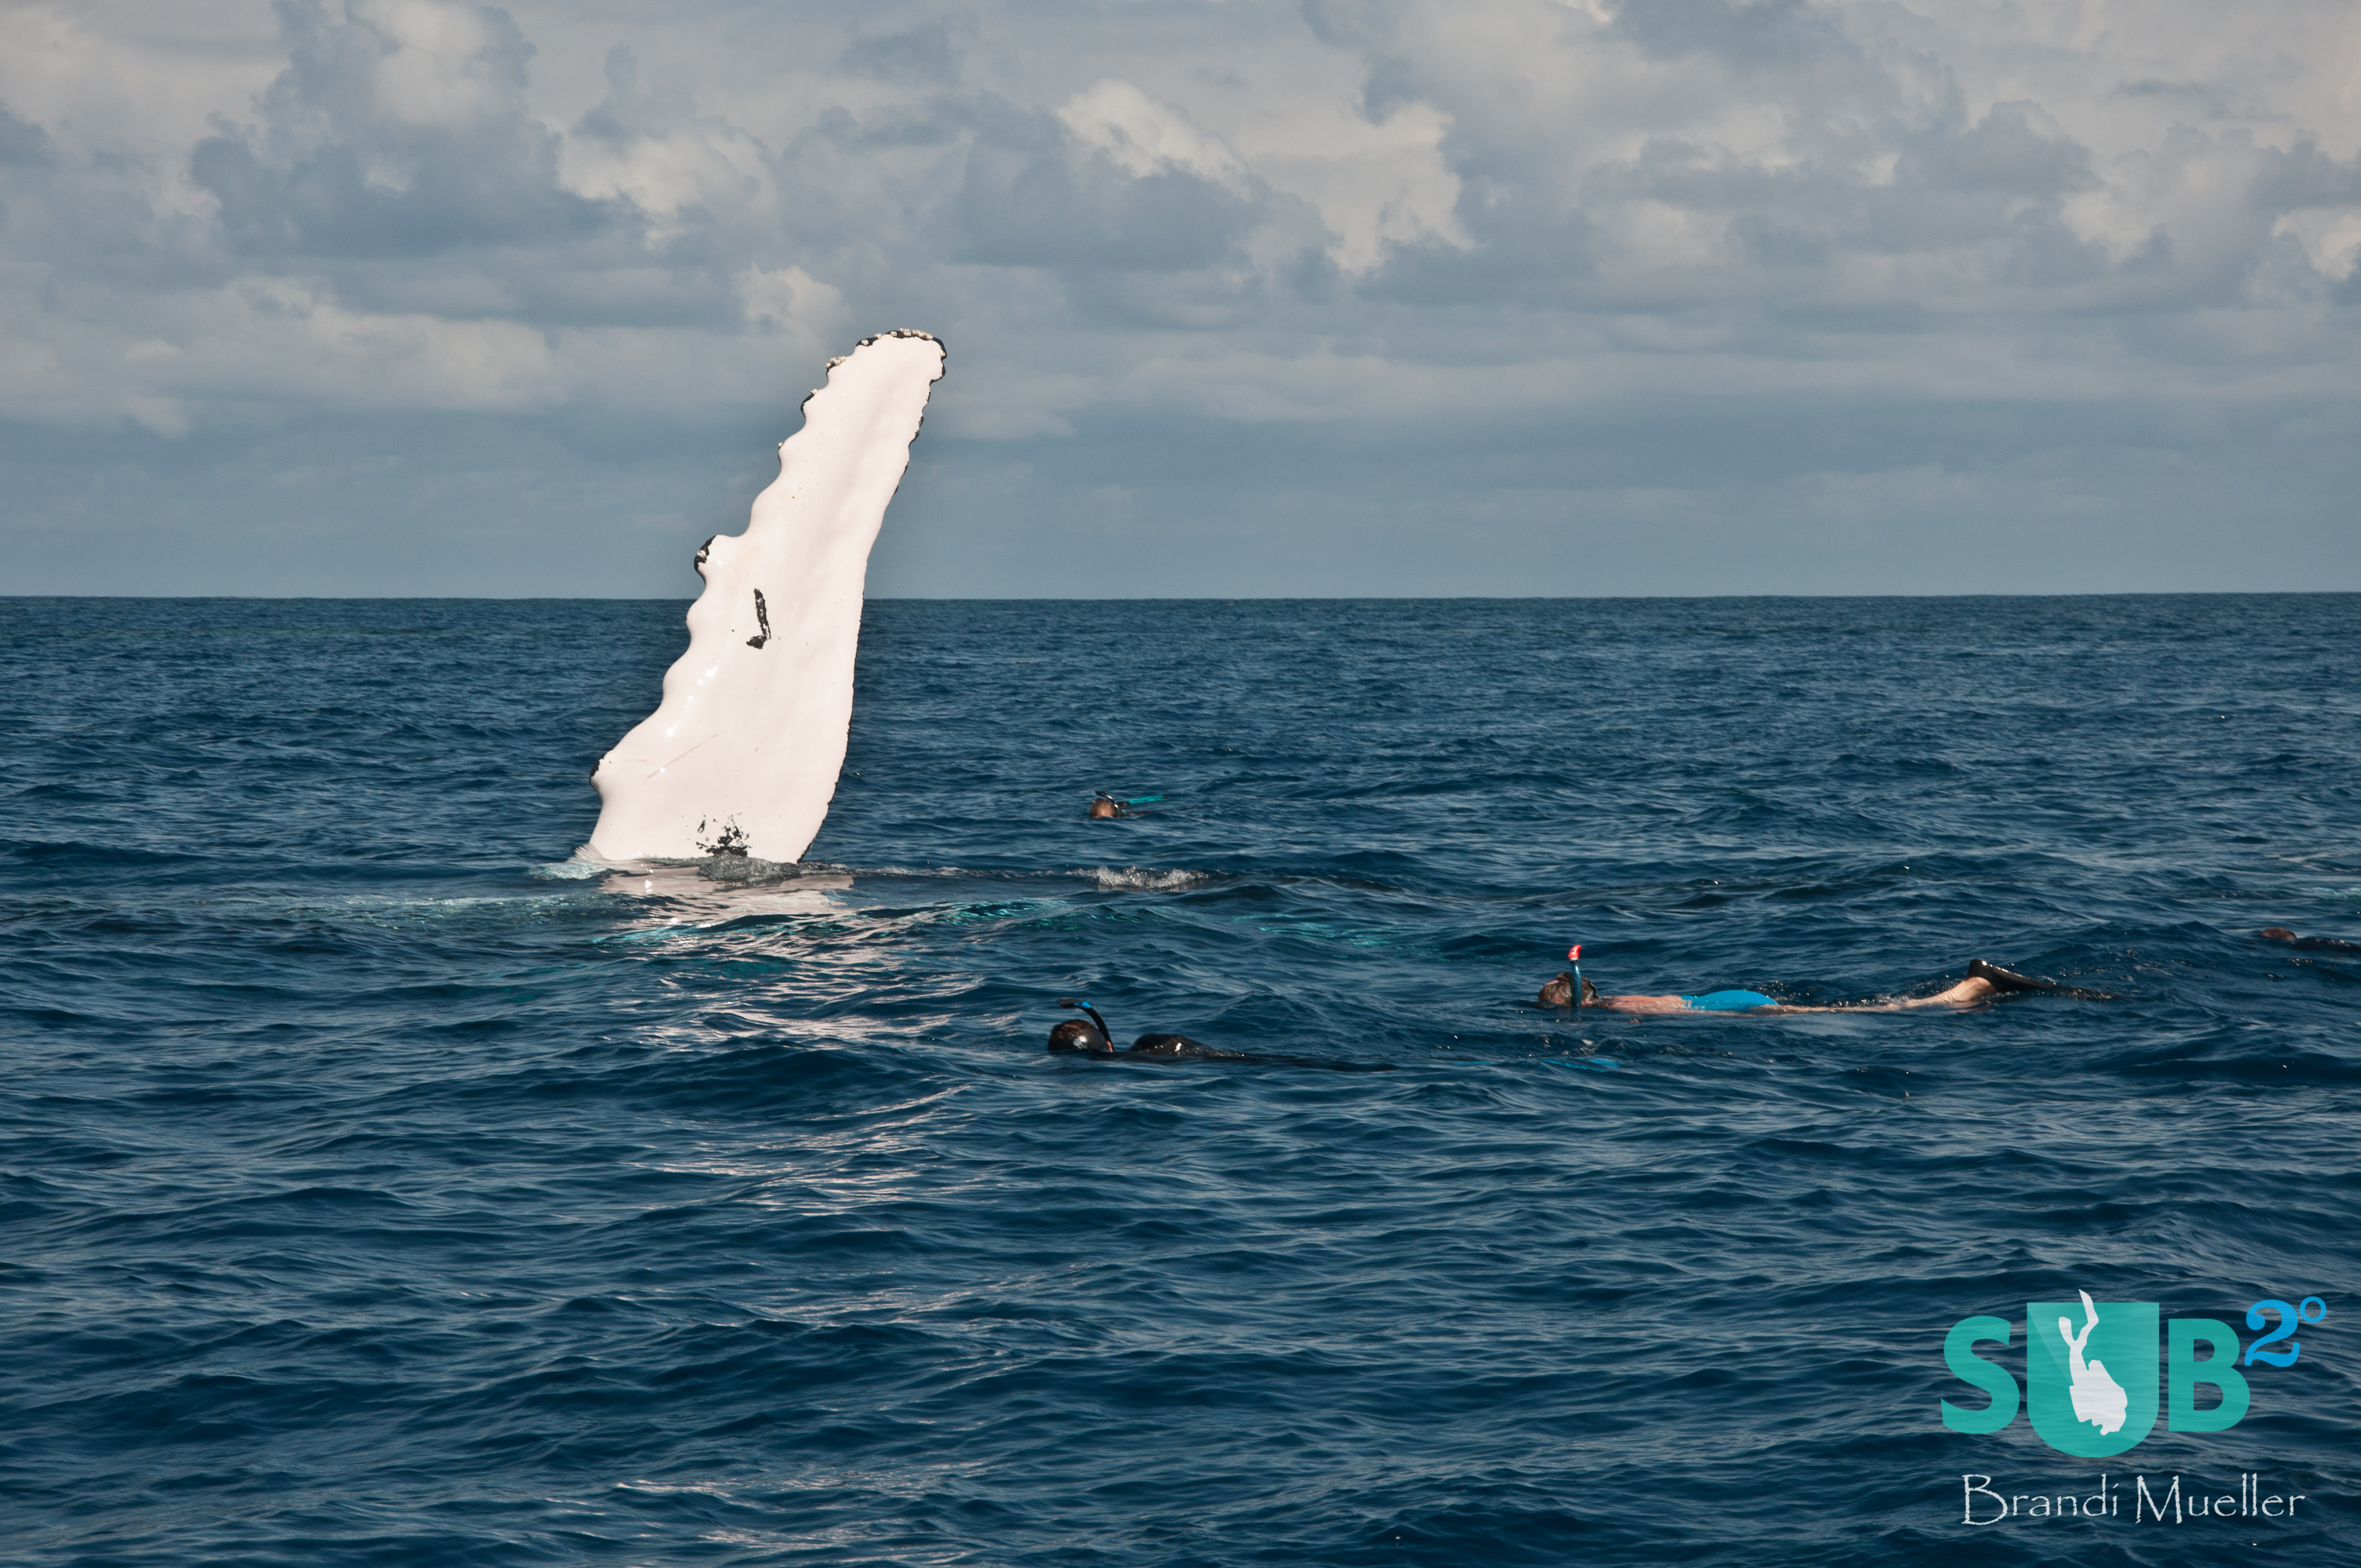 Snorkelers get close to an adult humpback as it peck slaps.